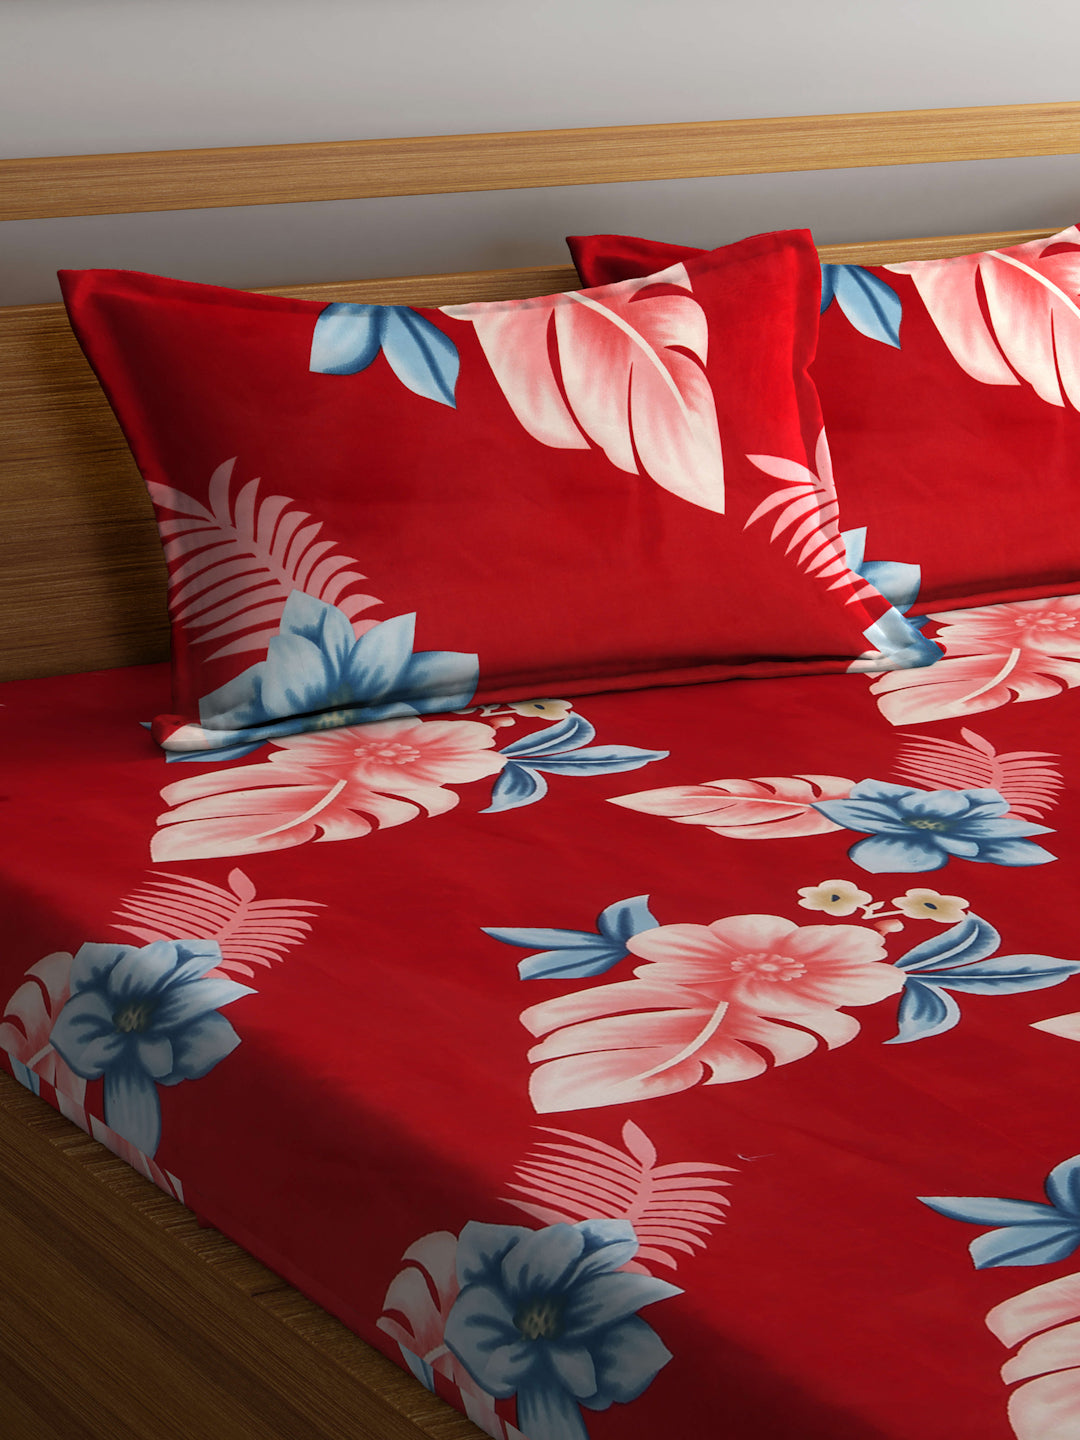 Arrabi Red Floral TC Cotton Blend King Size Bedsheet with 2 Pillow Covers (250 X 215 cm)